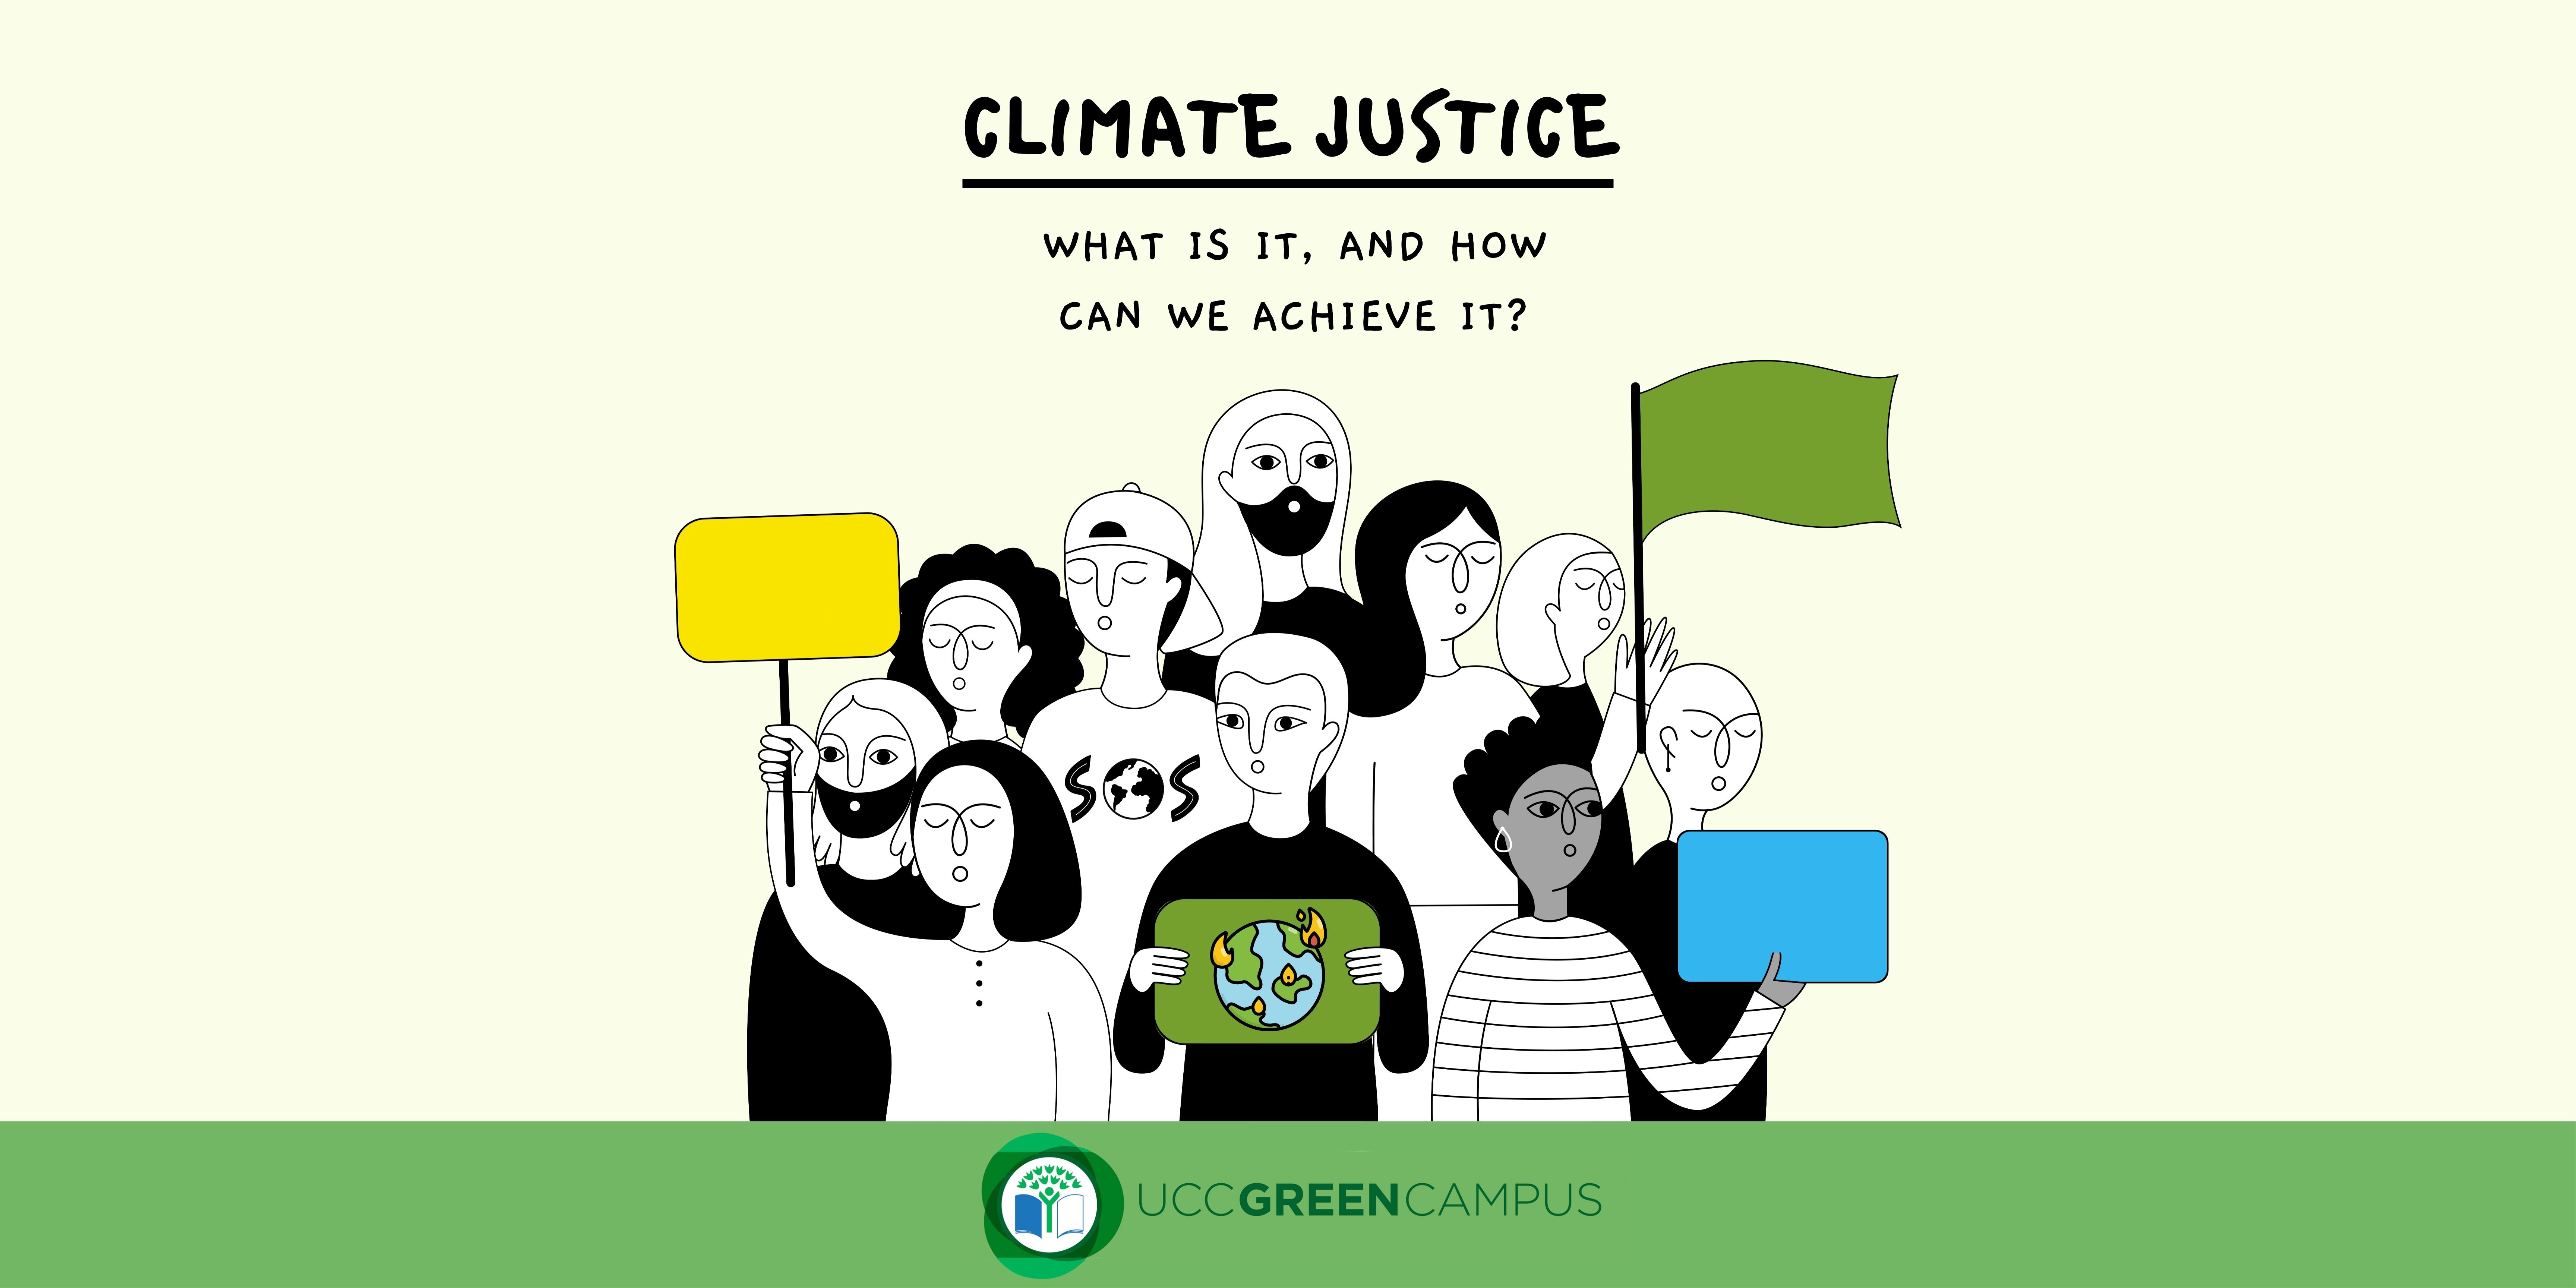 Introduction To Climate Justice: What Is It And How Can We Achieve It?